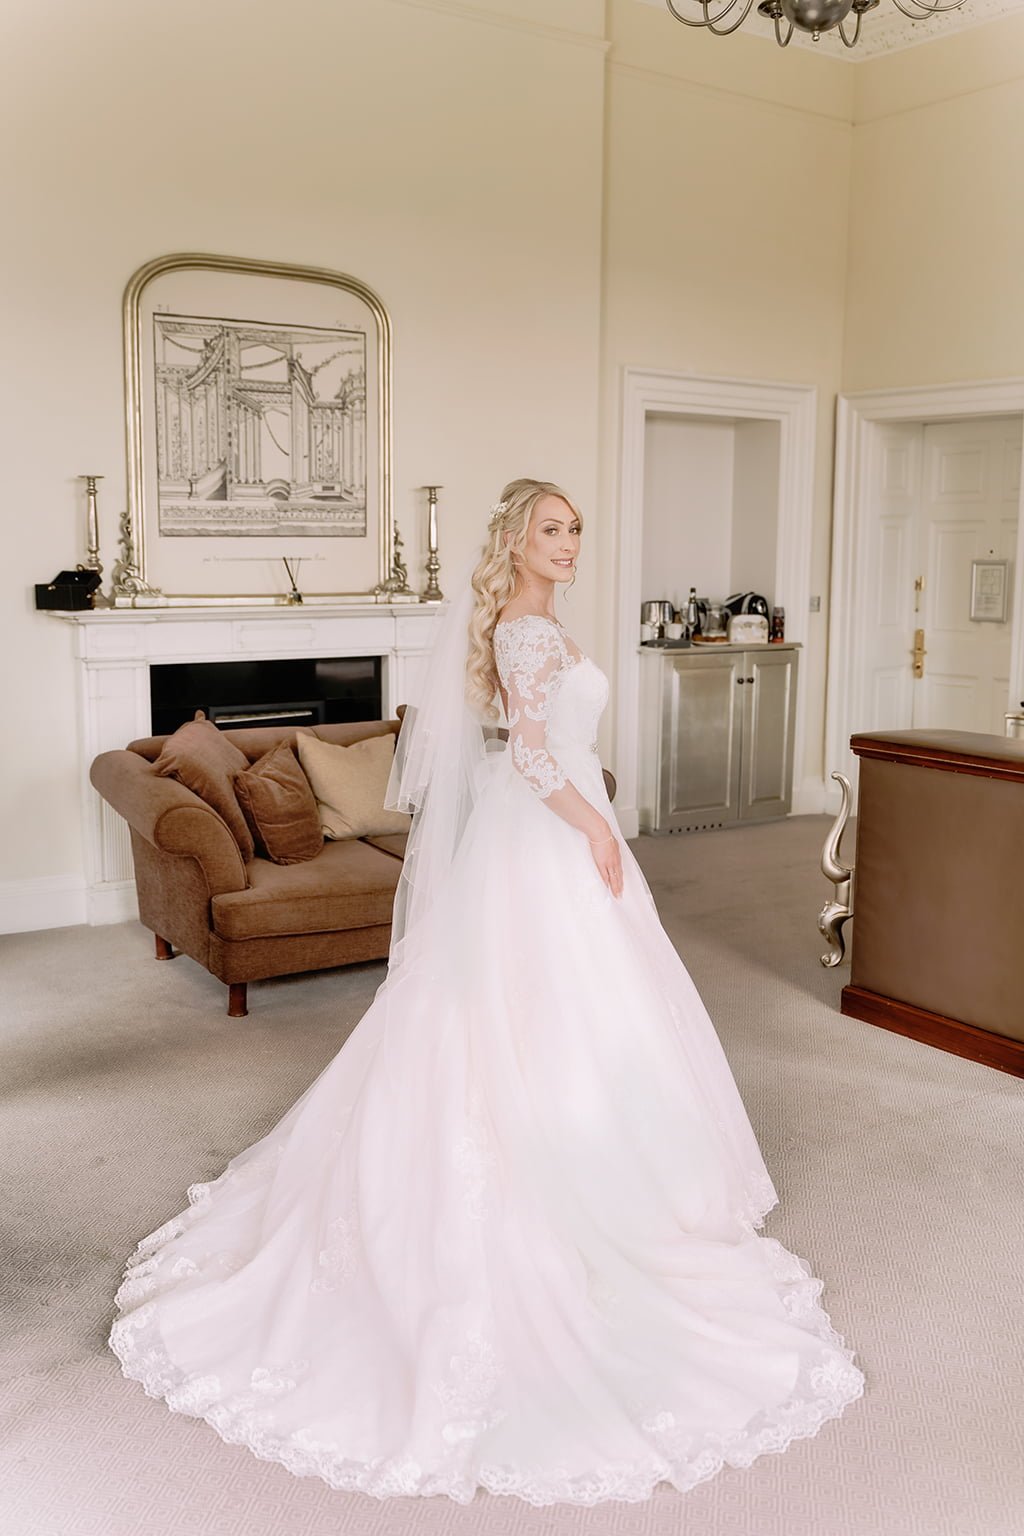 a woman in a wedding dress standing in a living room.